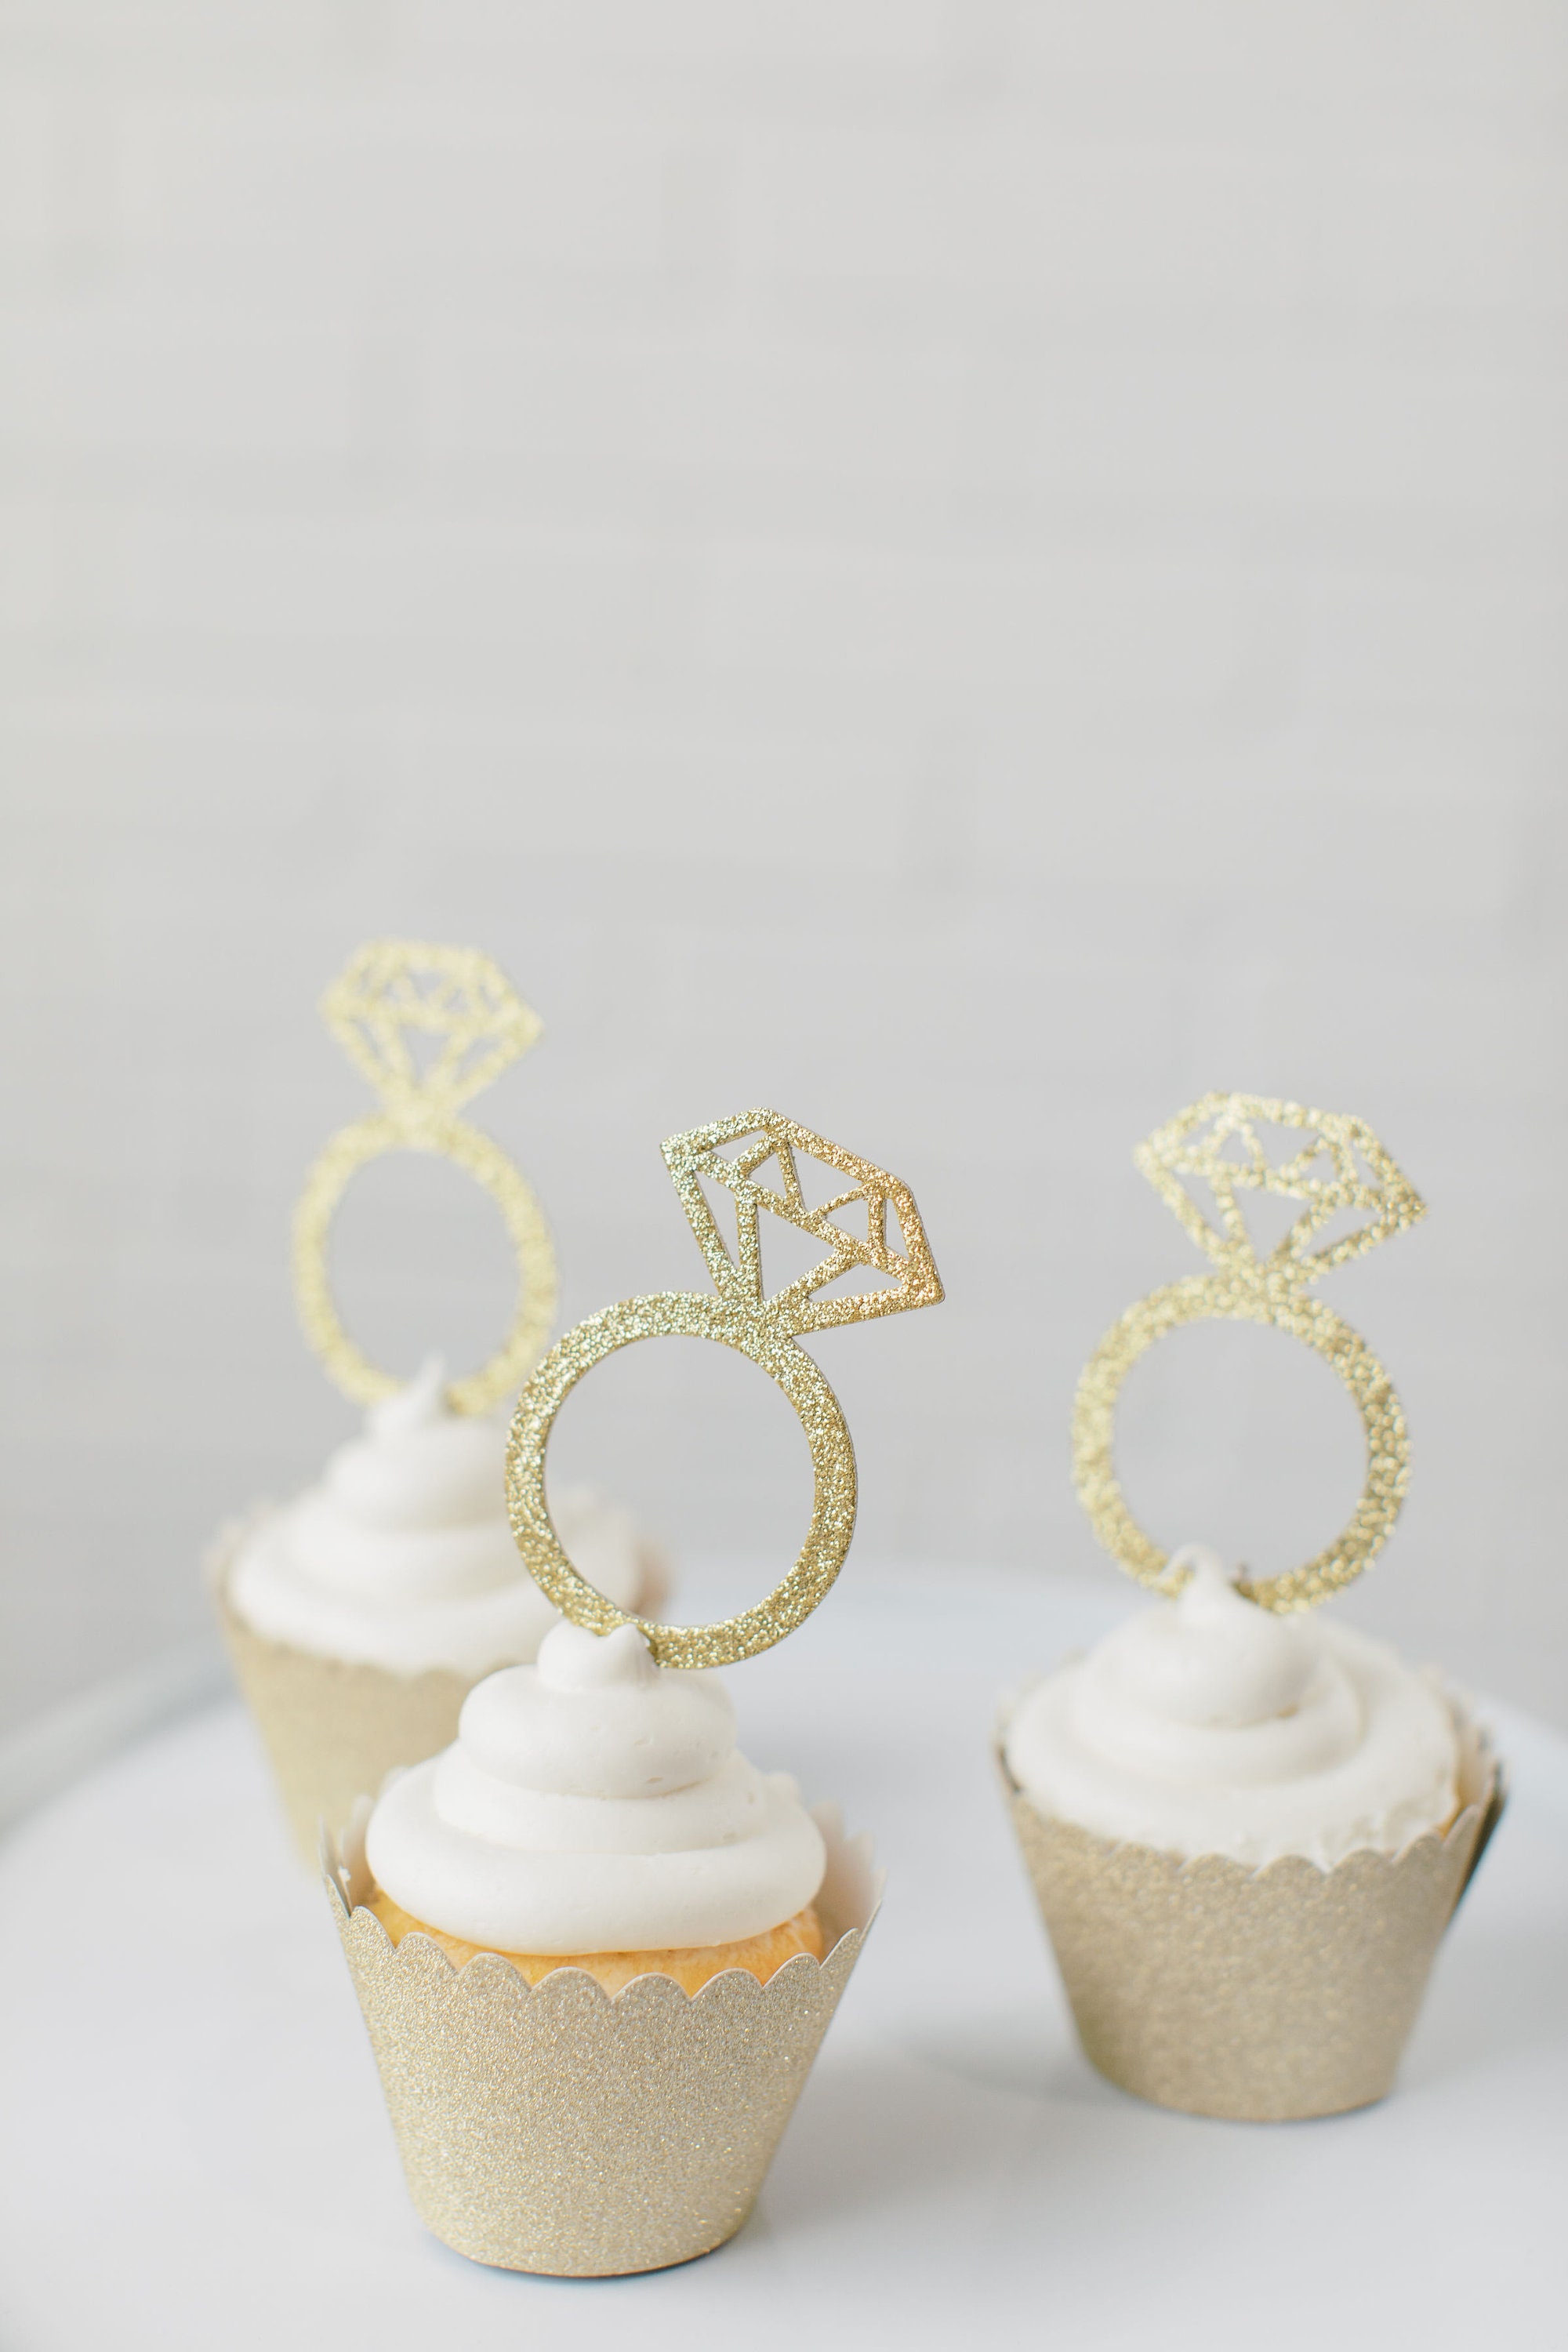 Gold Glitter Ring Cupcake Toppers Wedding Cupcake Toppers | Etsy